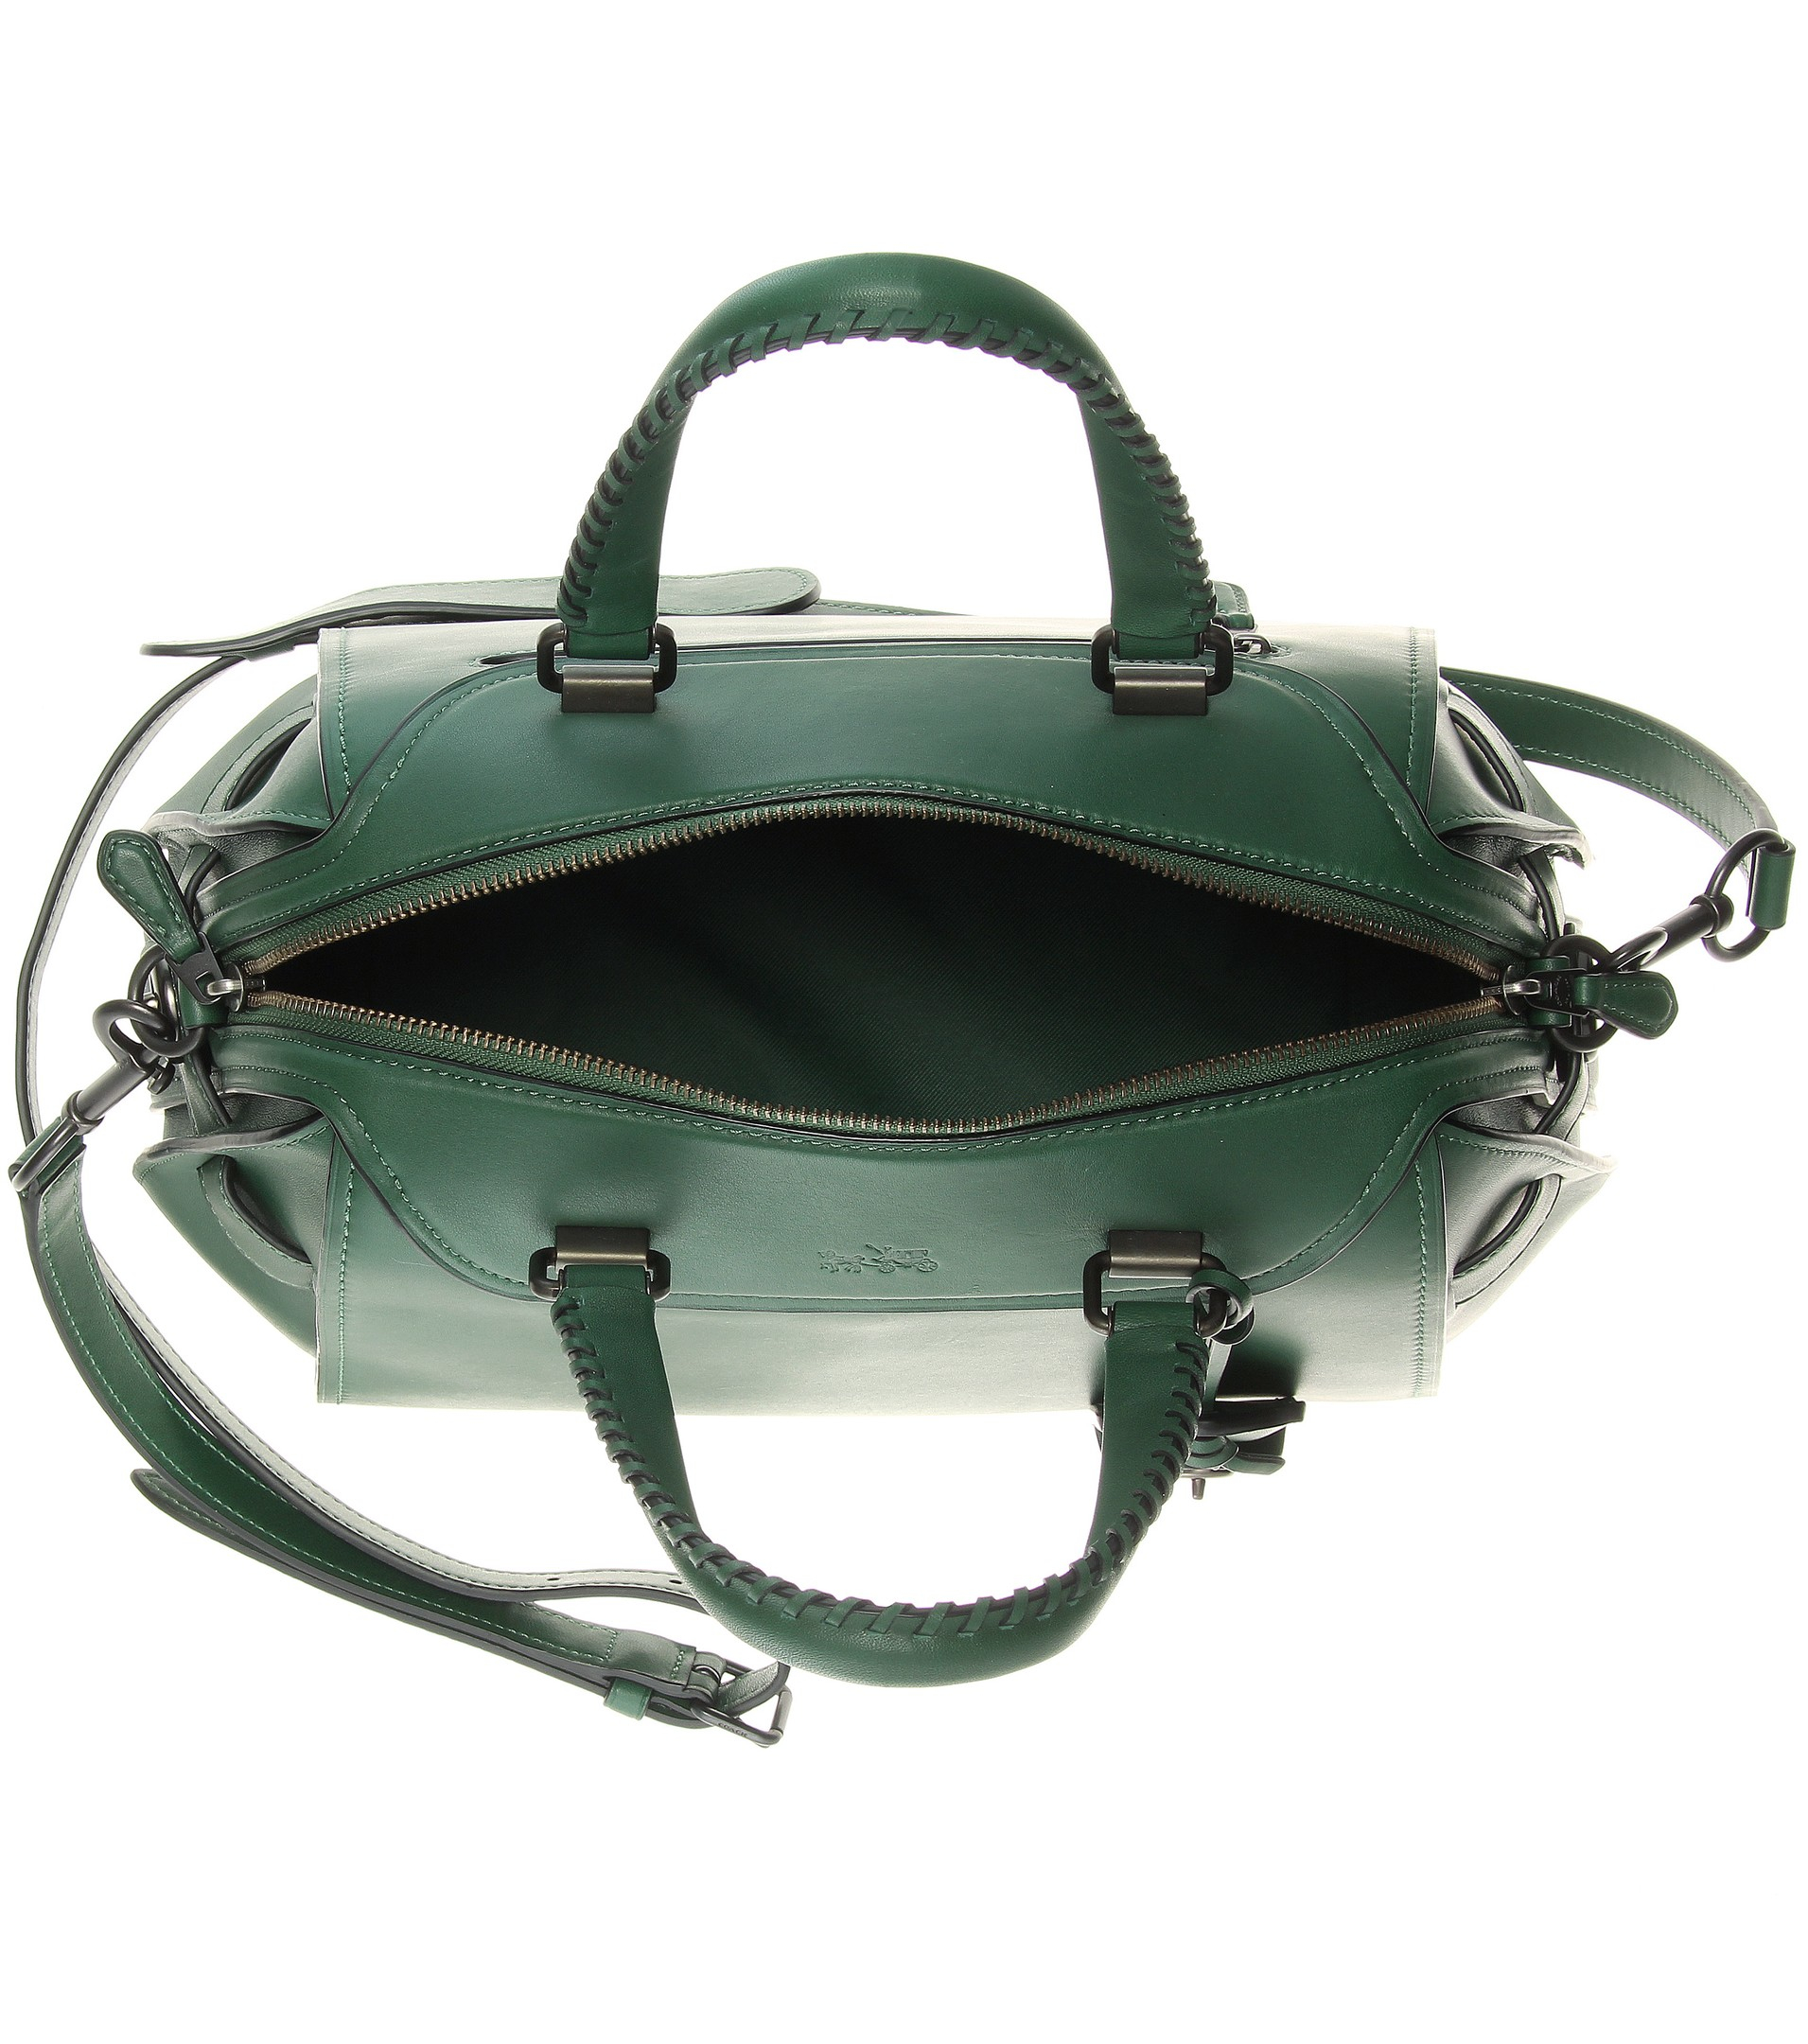 Lyst - Coach Leather Shoulder Bag in Green